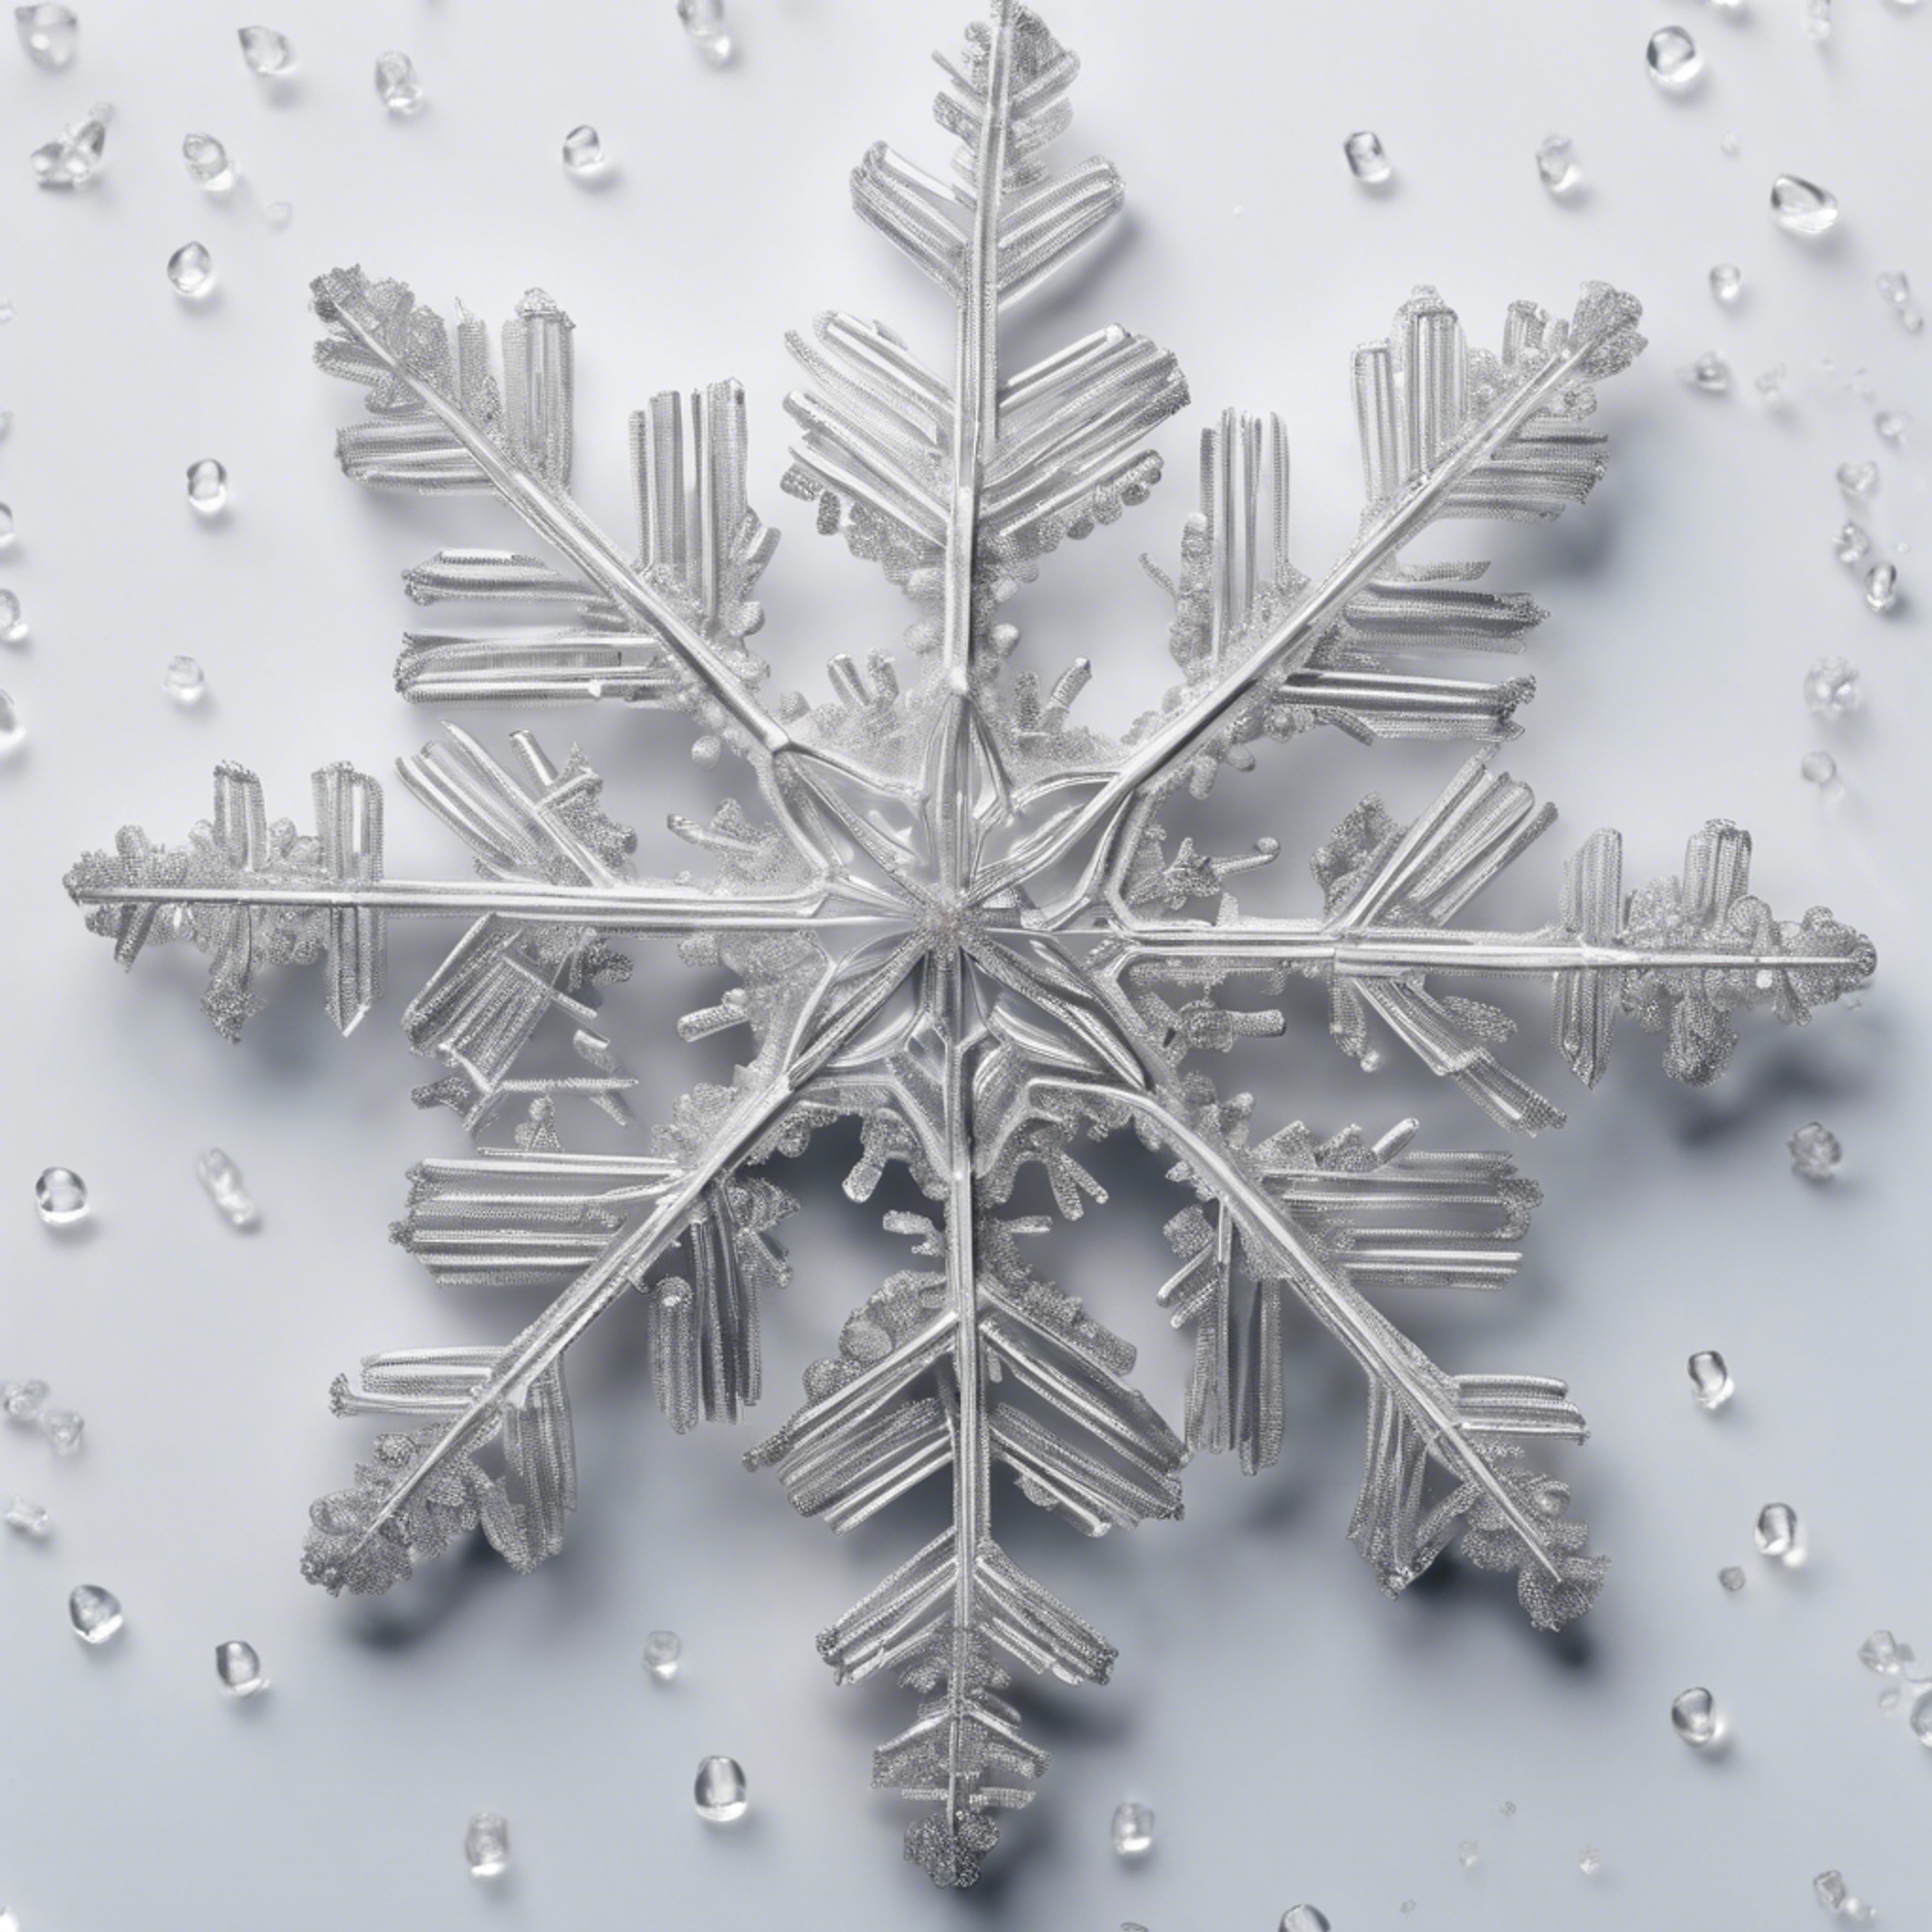 Close-up macro photography of a silver-white snowflake, intricate in detail, against a cool white background. Divar kağızı[e4635791b5a244959ce4]